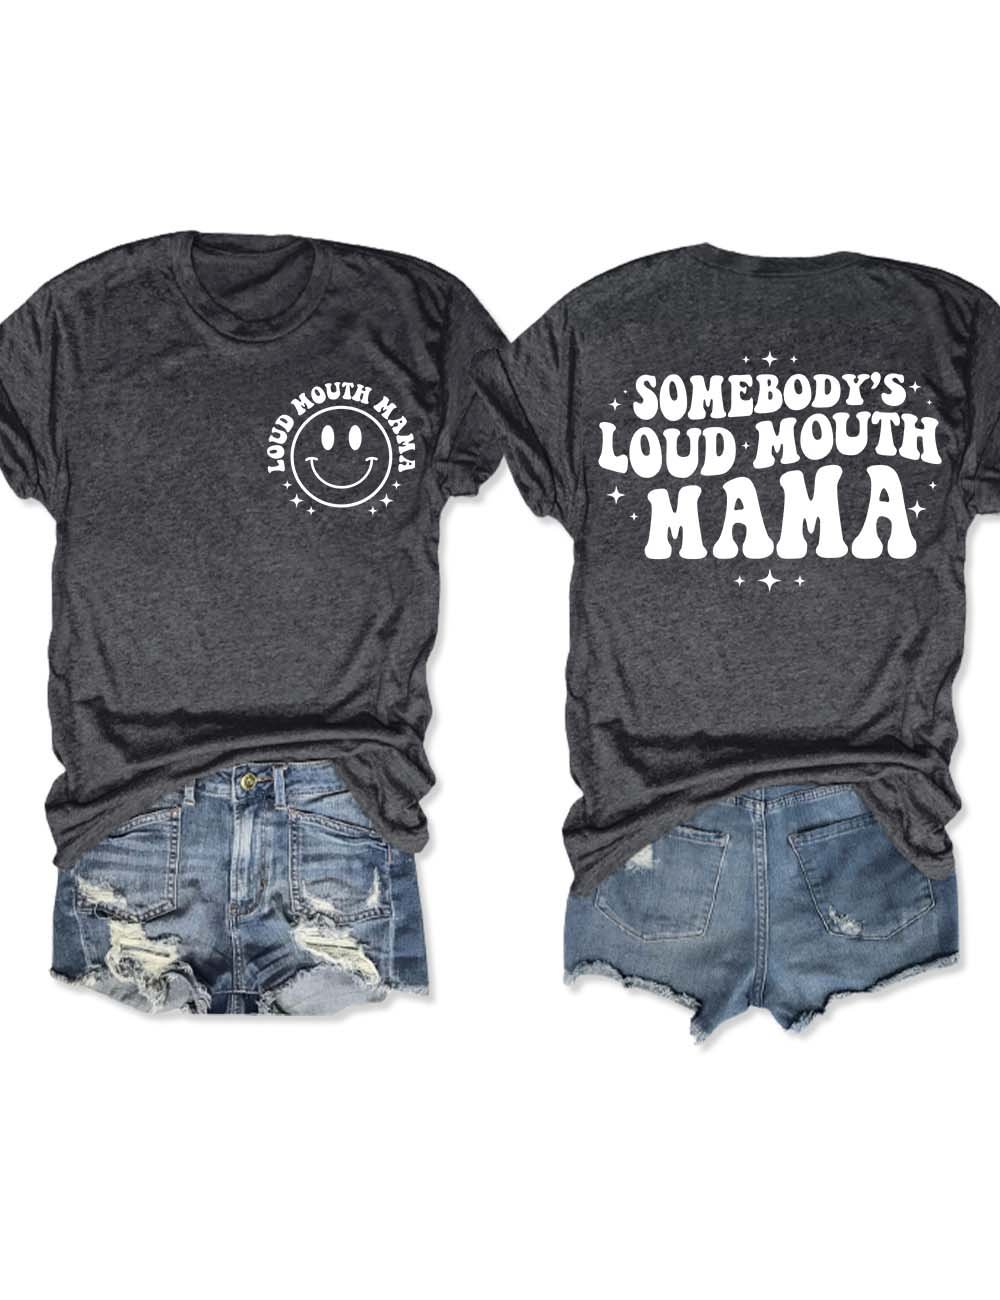 Somebody's Loud Mouth Mama T-Shirt